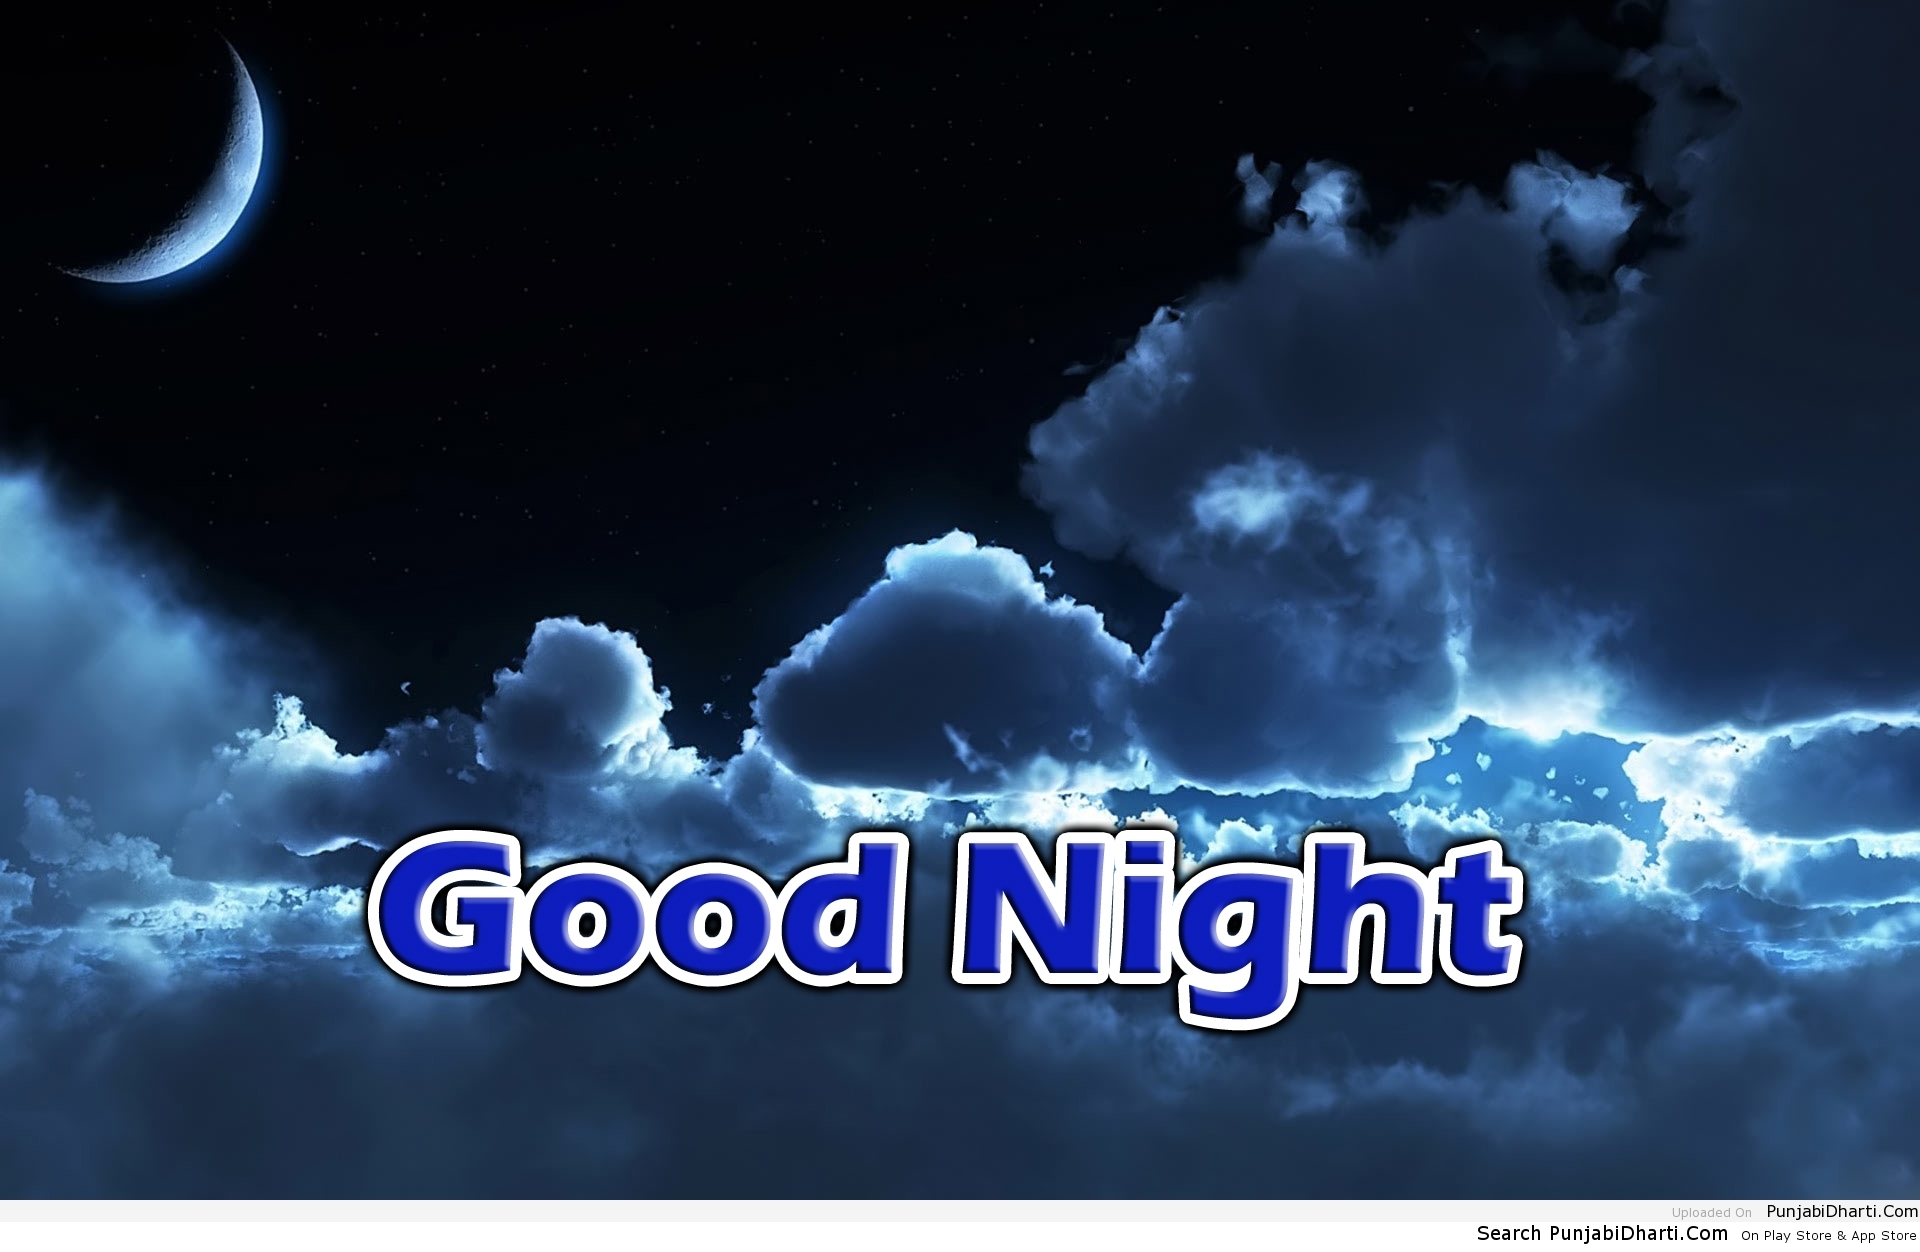 Good Night Graphics,Images For Facebook, Whatsapp, Twitter